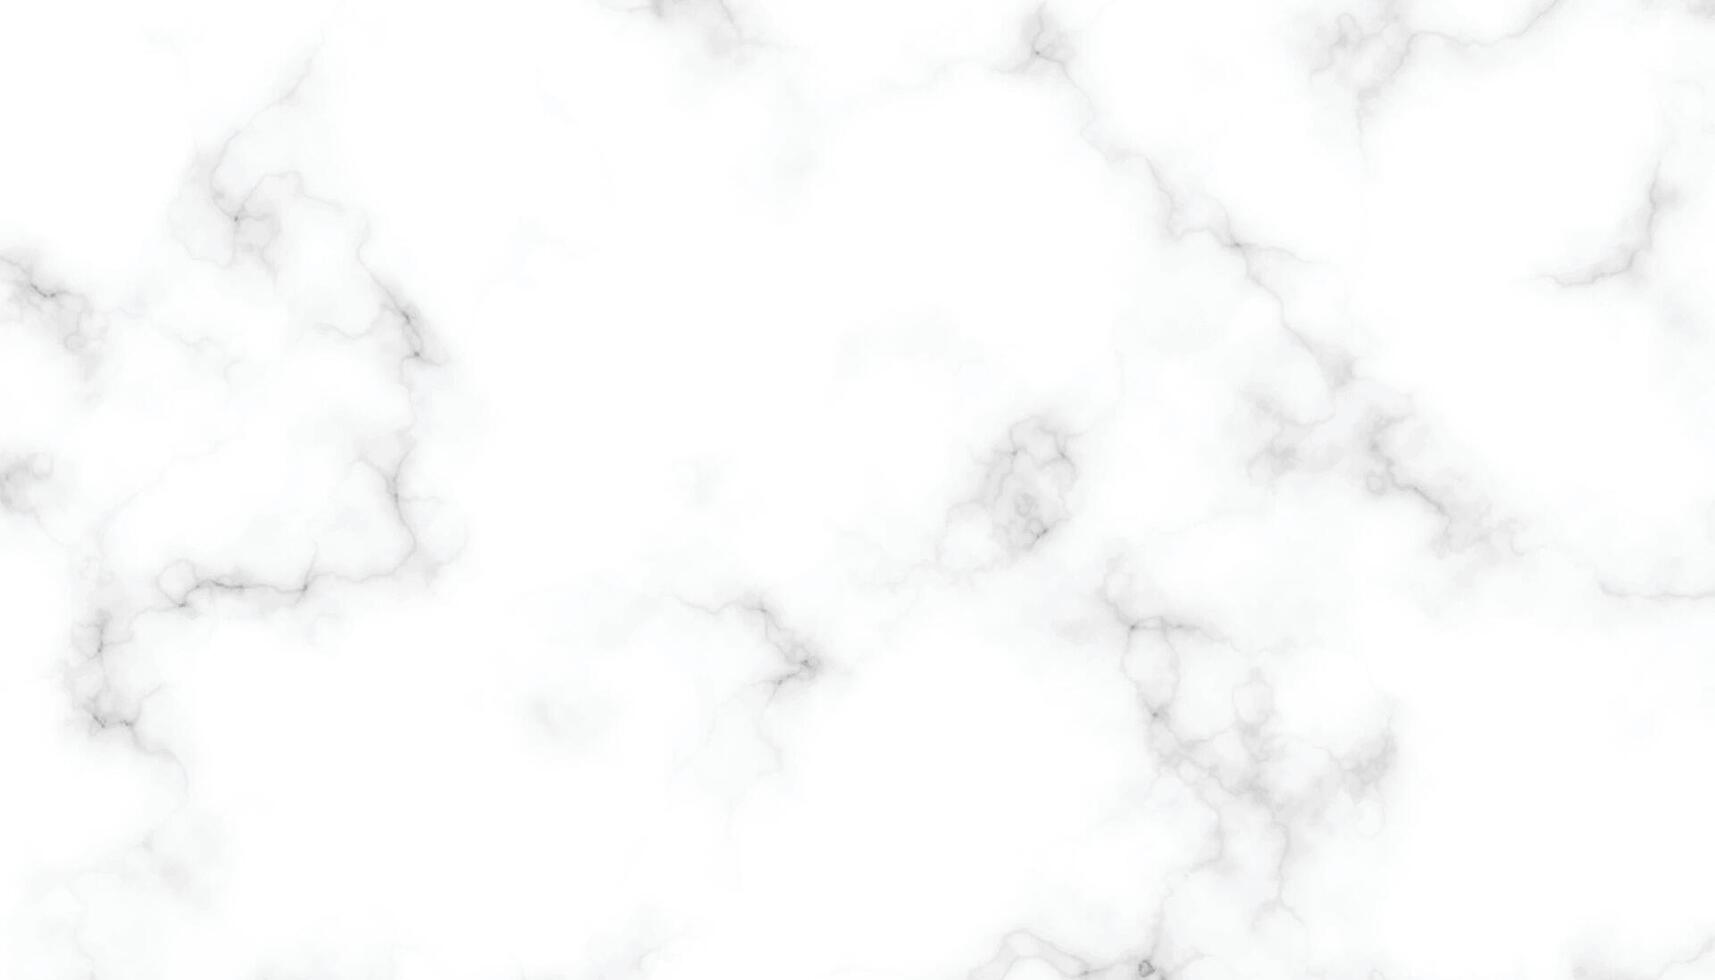 white marble texture and background. black and white marble stone, wall tiles texture. white carrara marble stone texture. seamless pattern of tile stone with bright and luxury vector